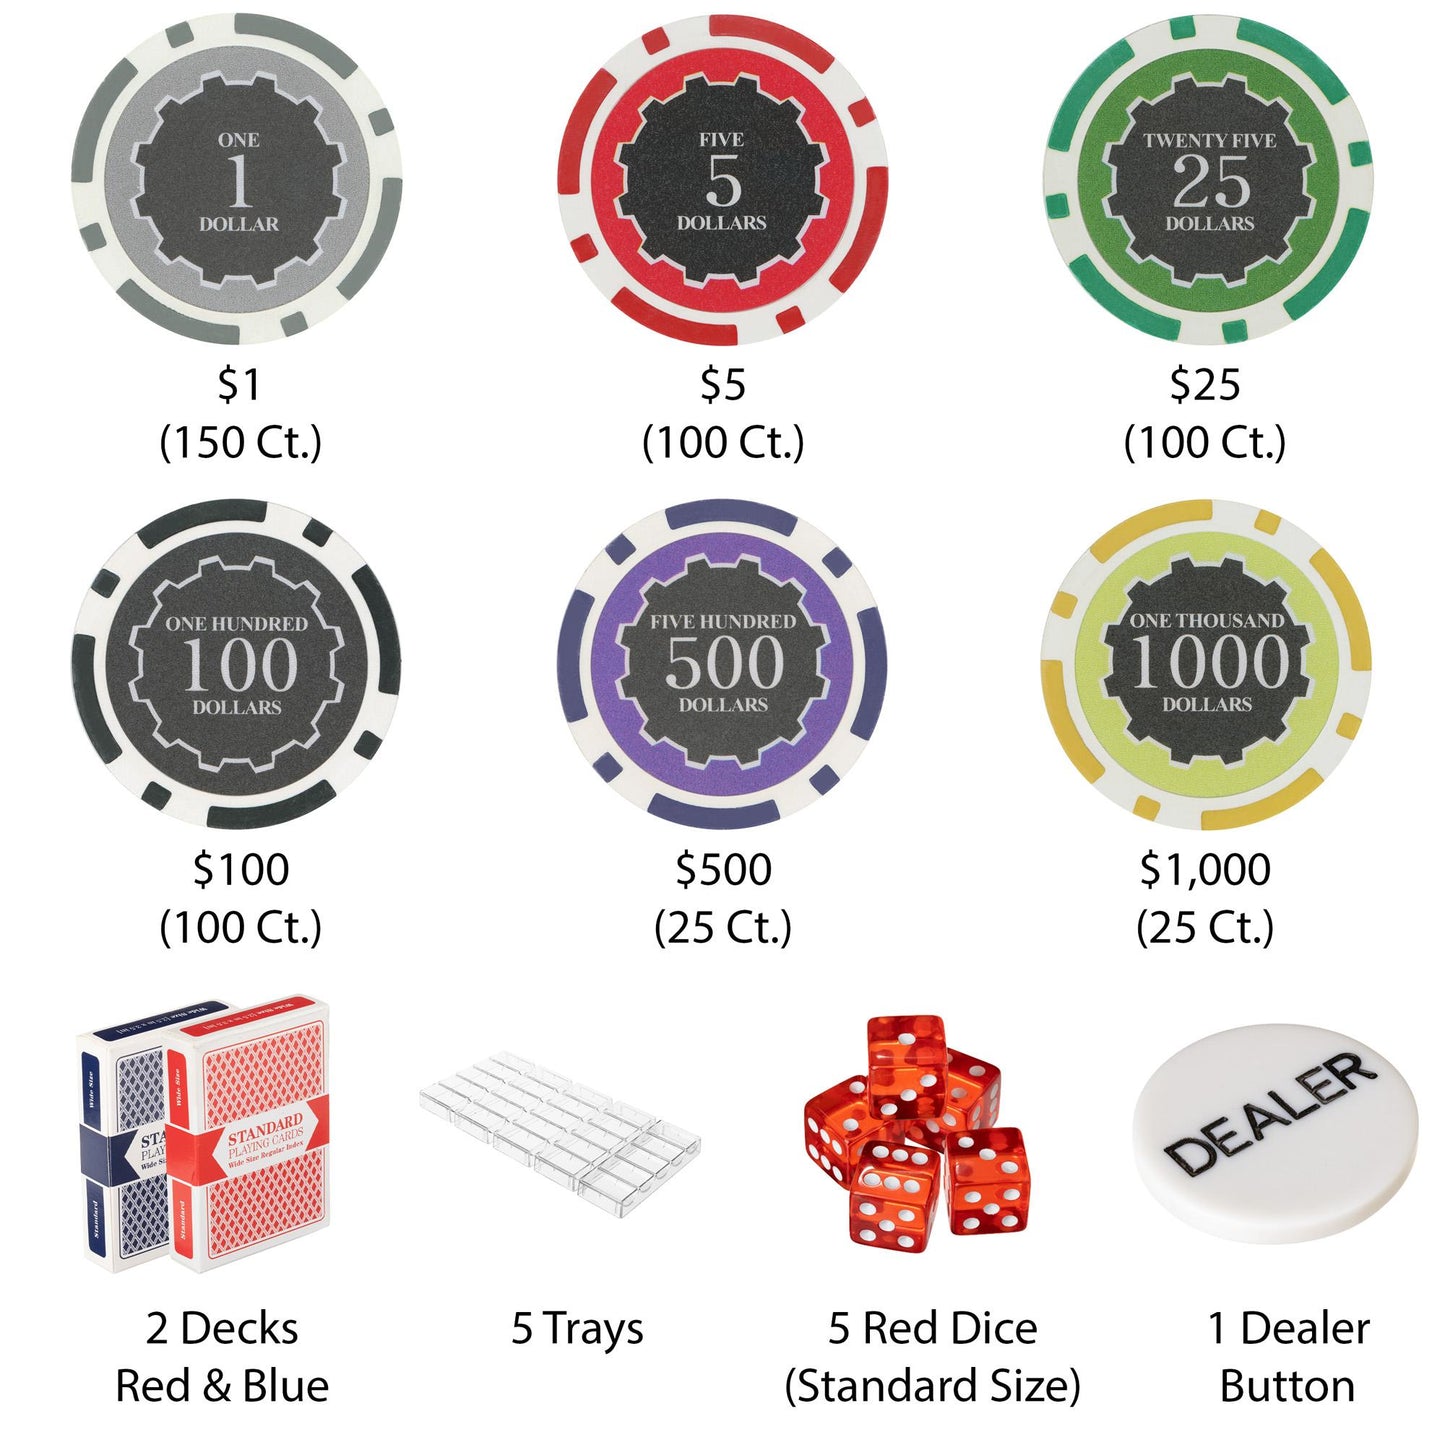 500 Eclipse Poker Chips with Claysmith Aluminum Case